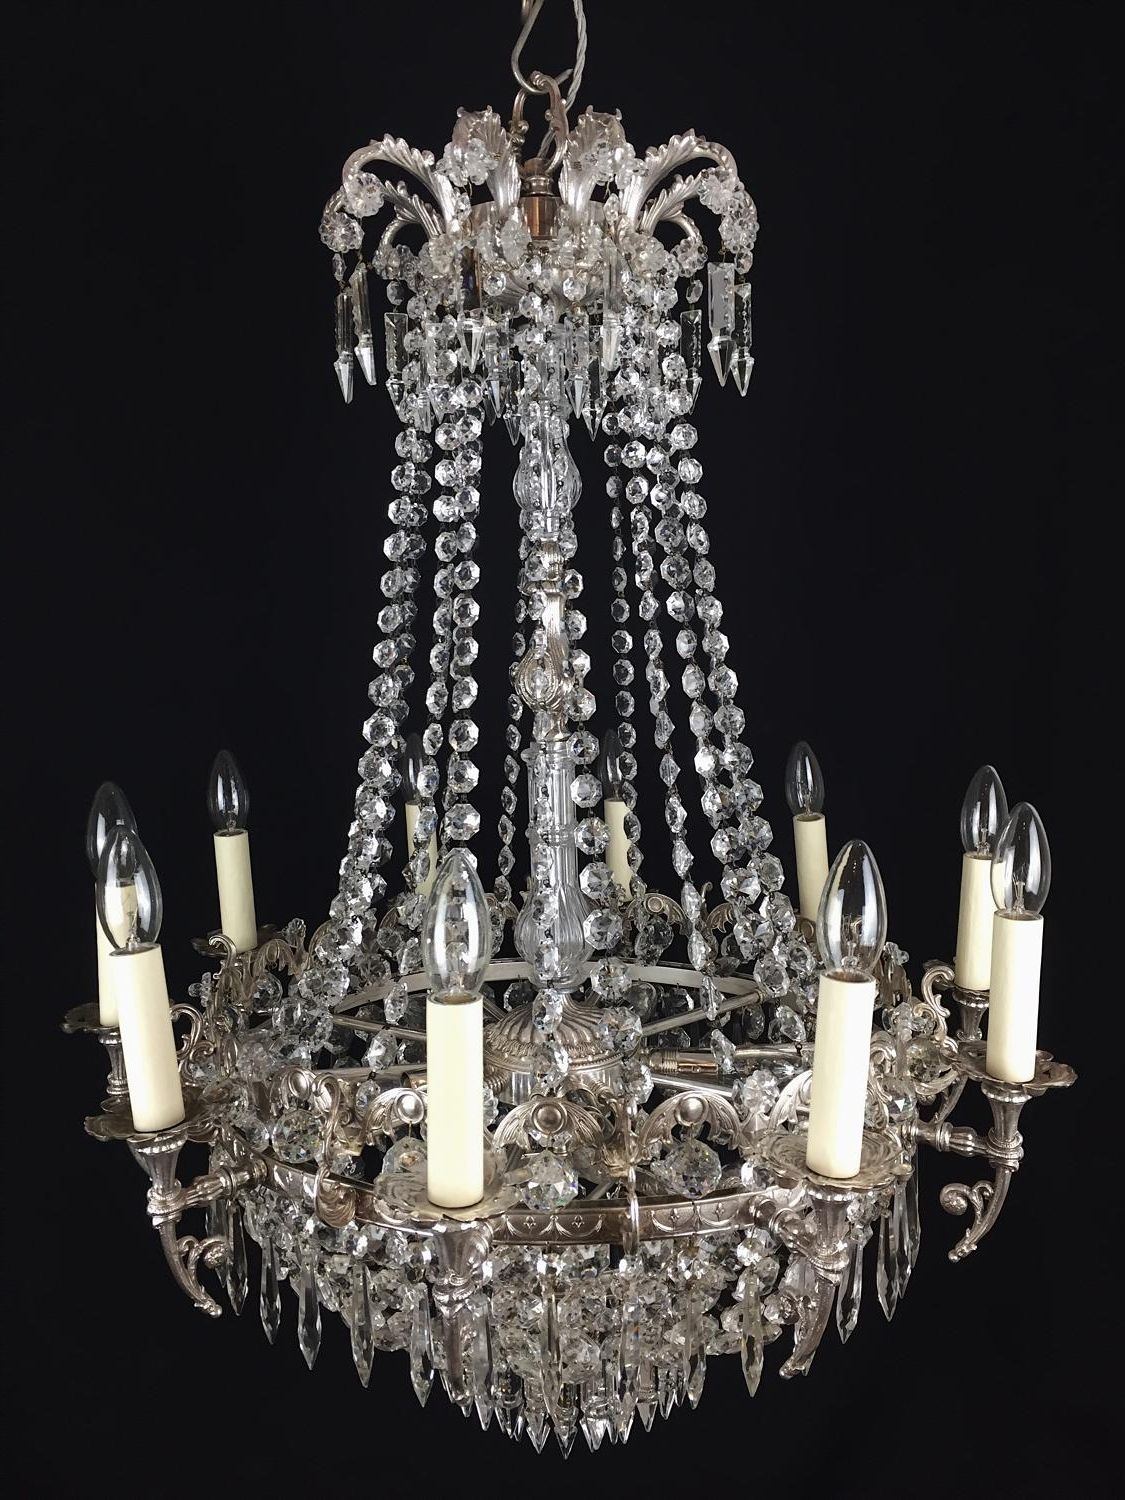 A Pair Of Silvered Brass, Waterfall Chandeliers In Chandeliers Regarding Fashionable Waterfall Chandeliers (View 7 of 15)